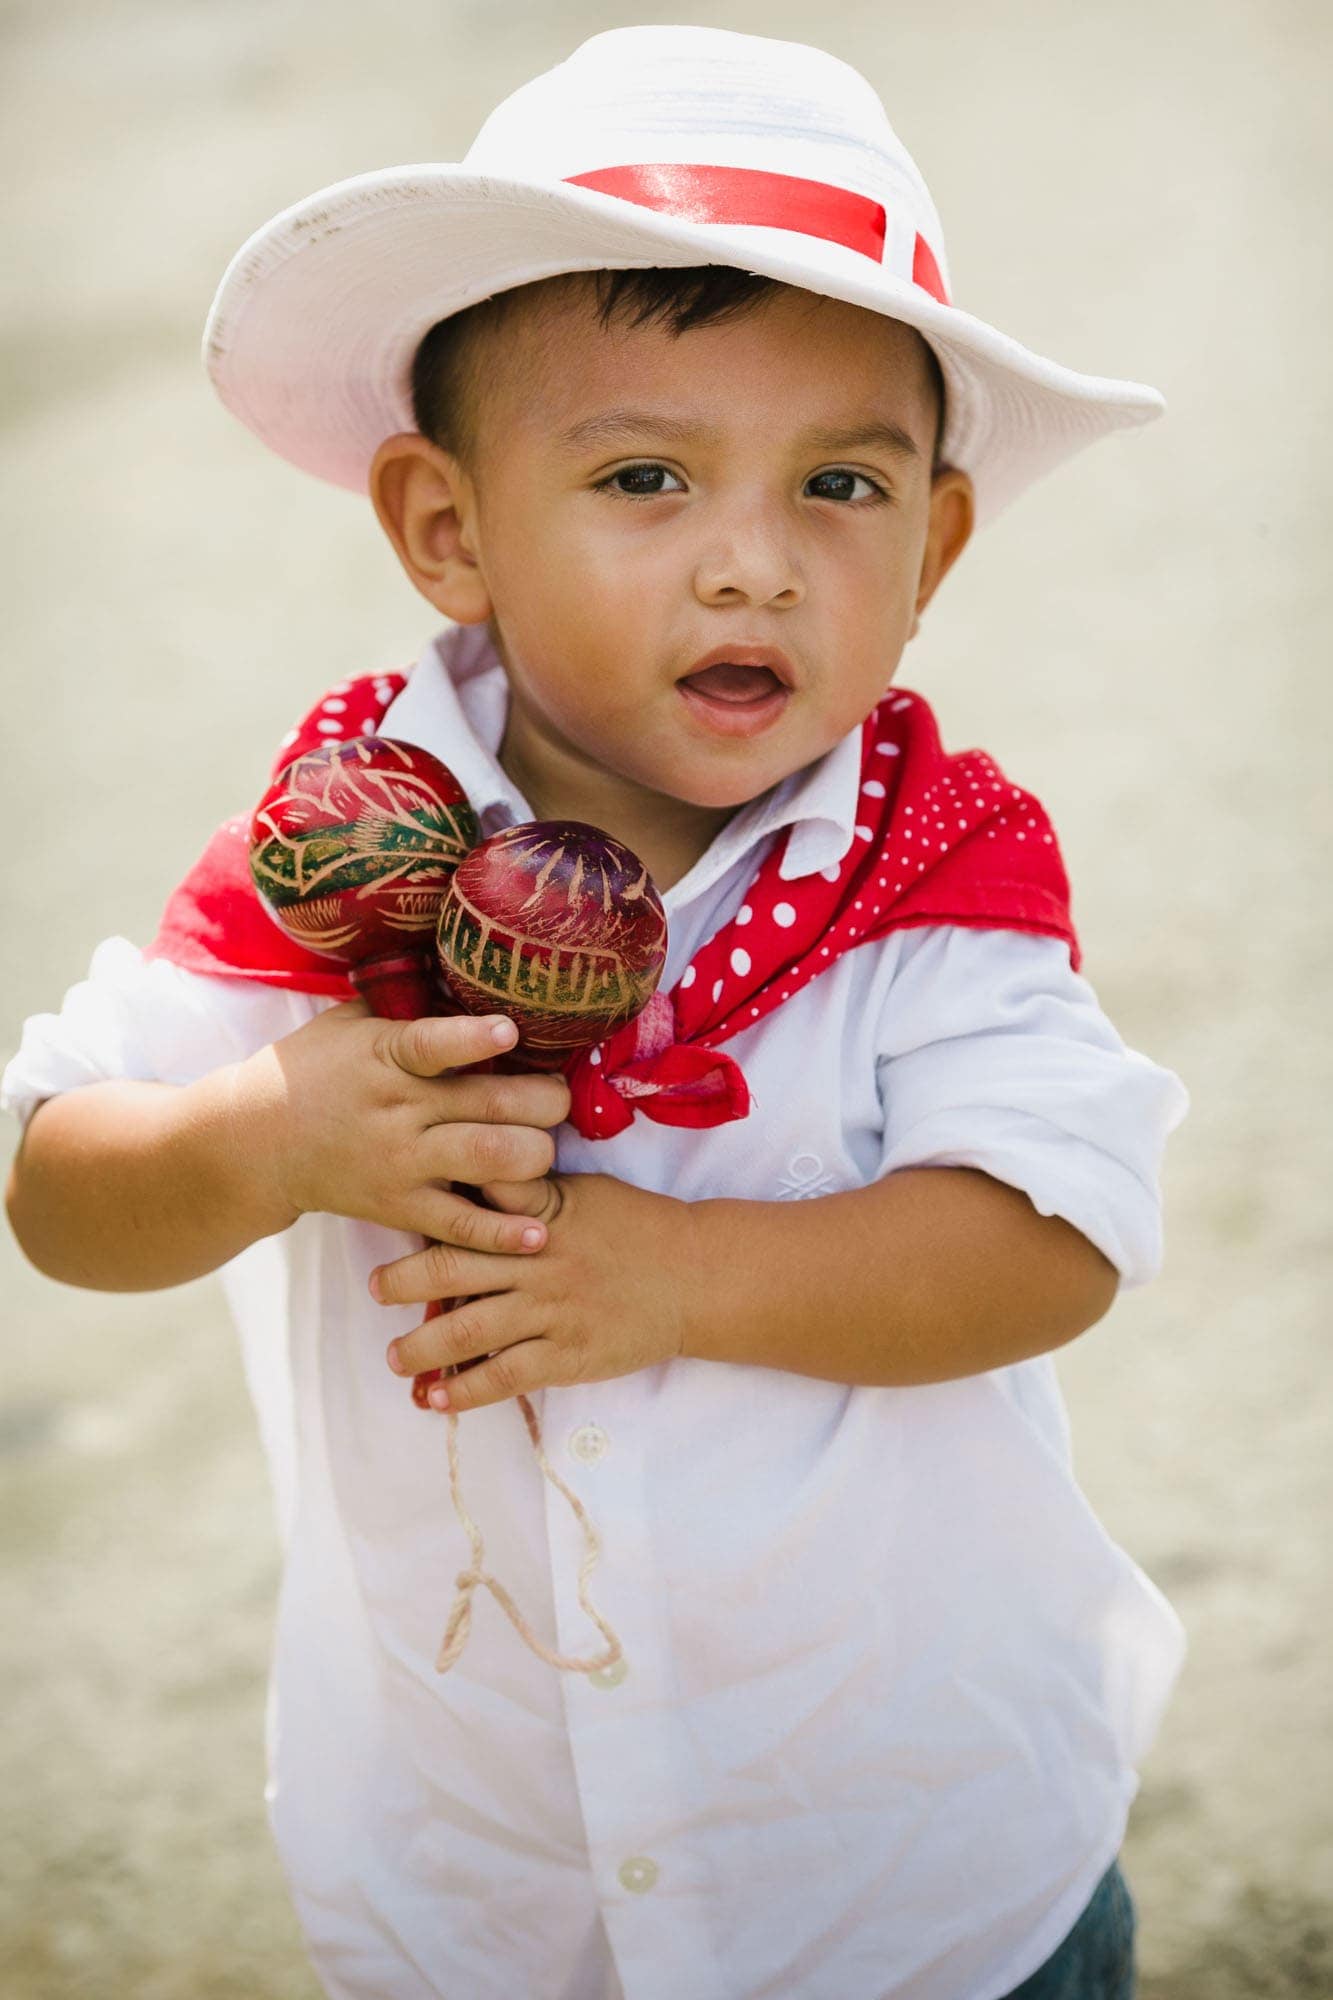 Little boy in campesino outfit (traditional Costa Rican clothing) with maracas